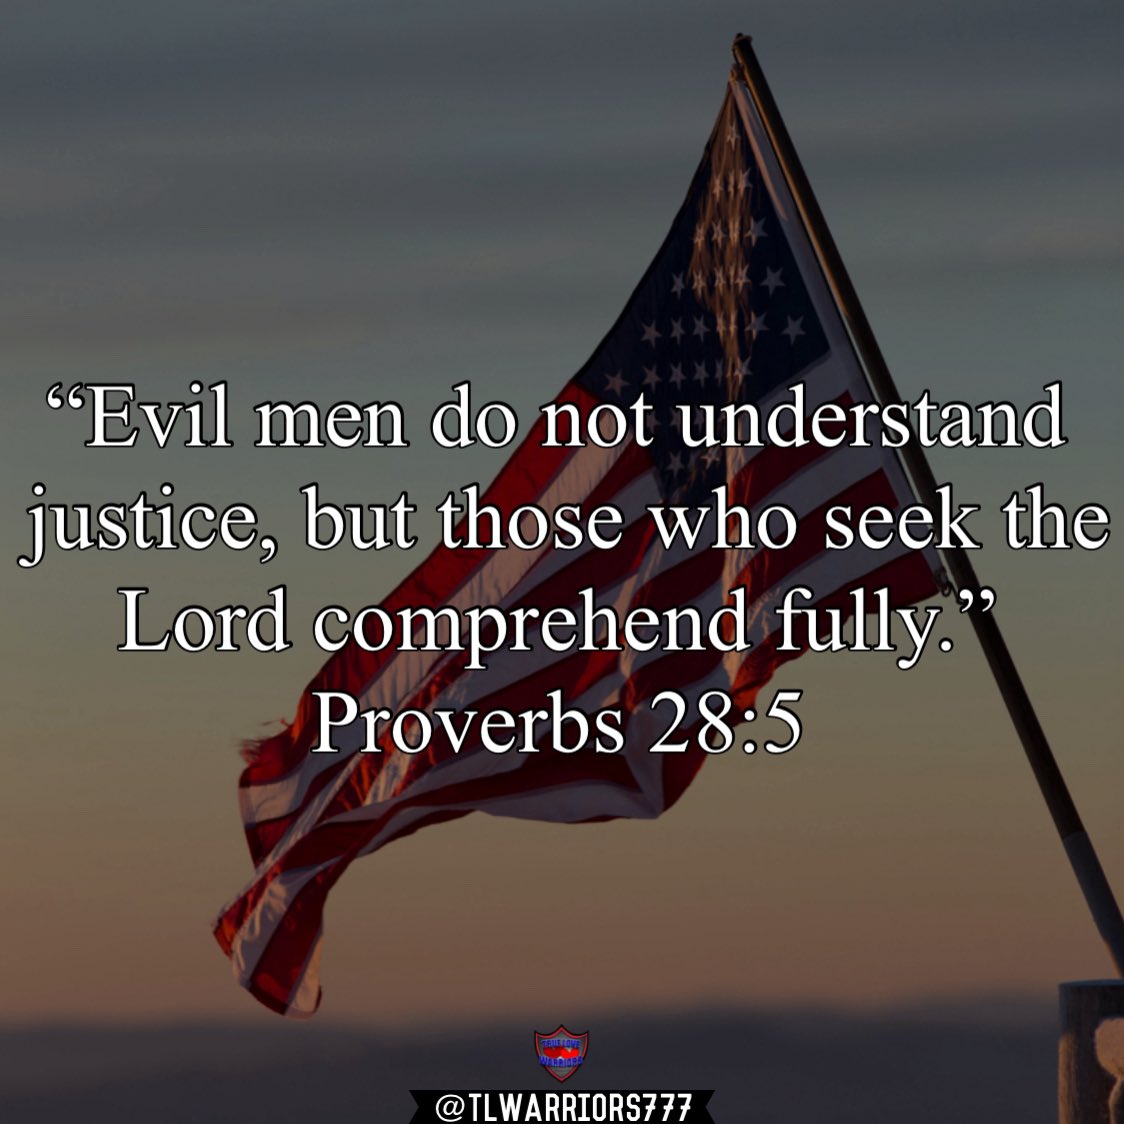 “Evil men do not understand justice, but those who seek the Lord comprehend fully.” Proverbs 28:5